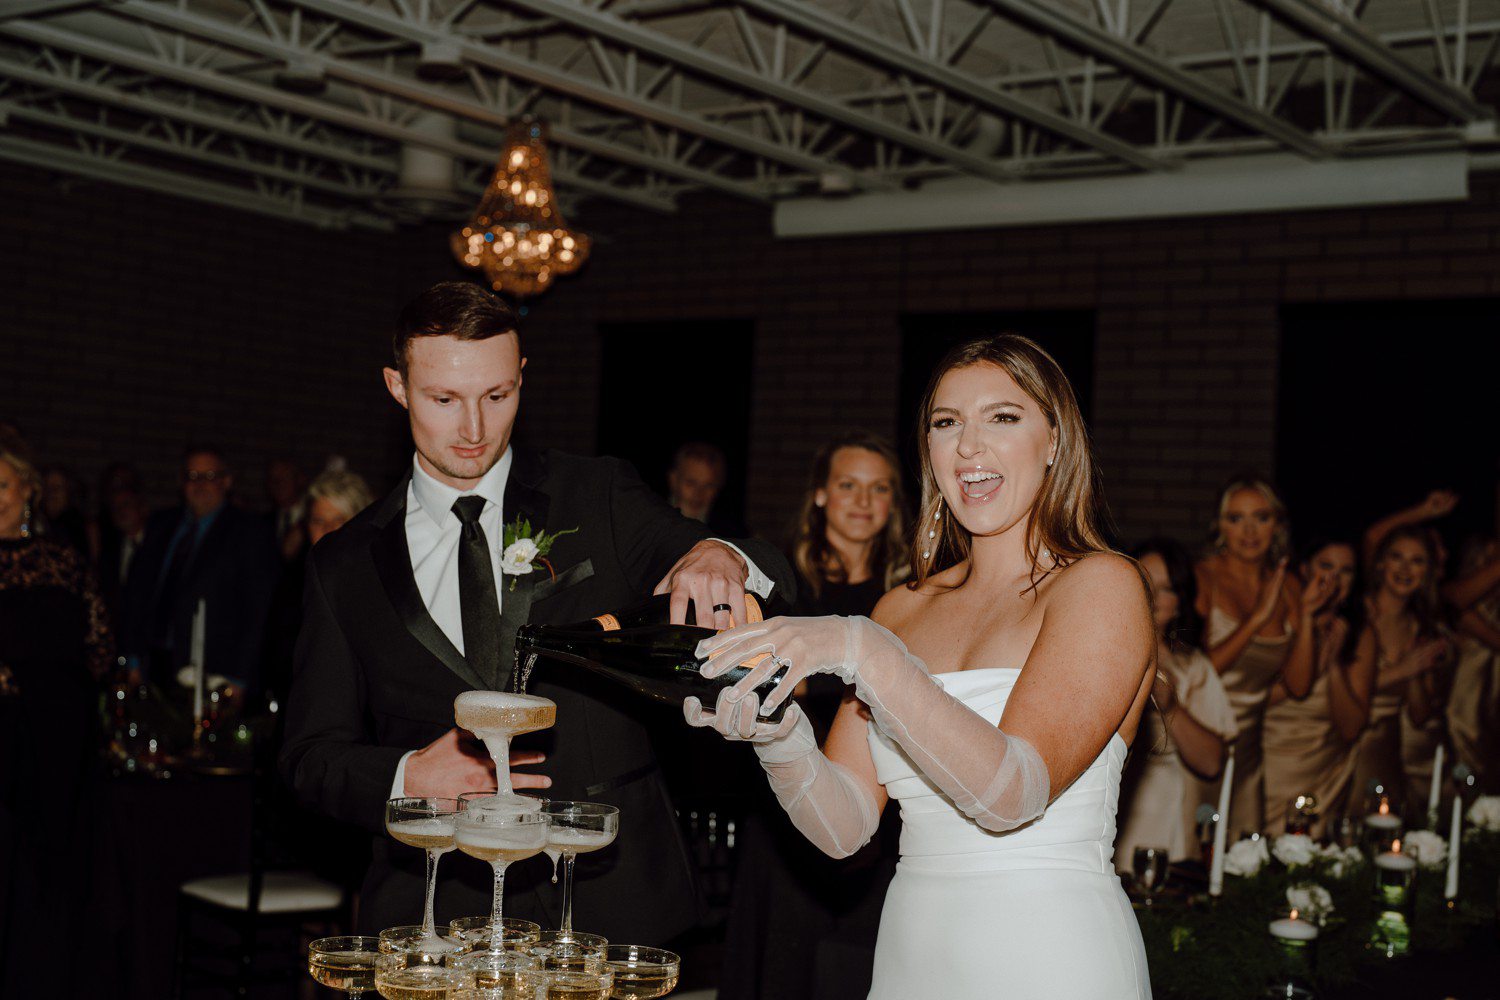 Bride and groom champagne wedding tower pour.